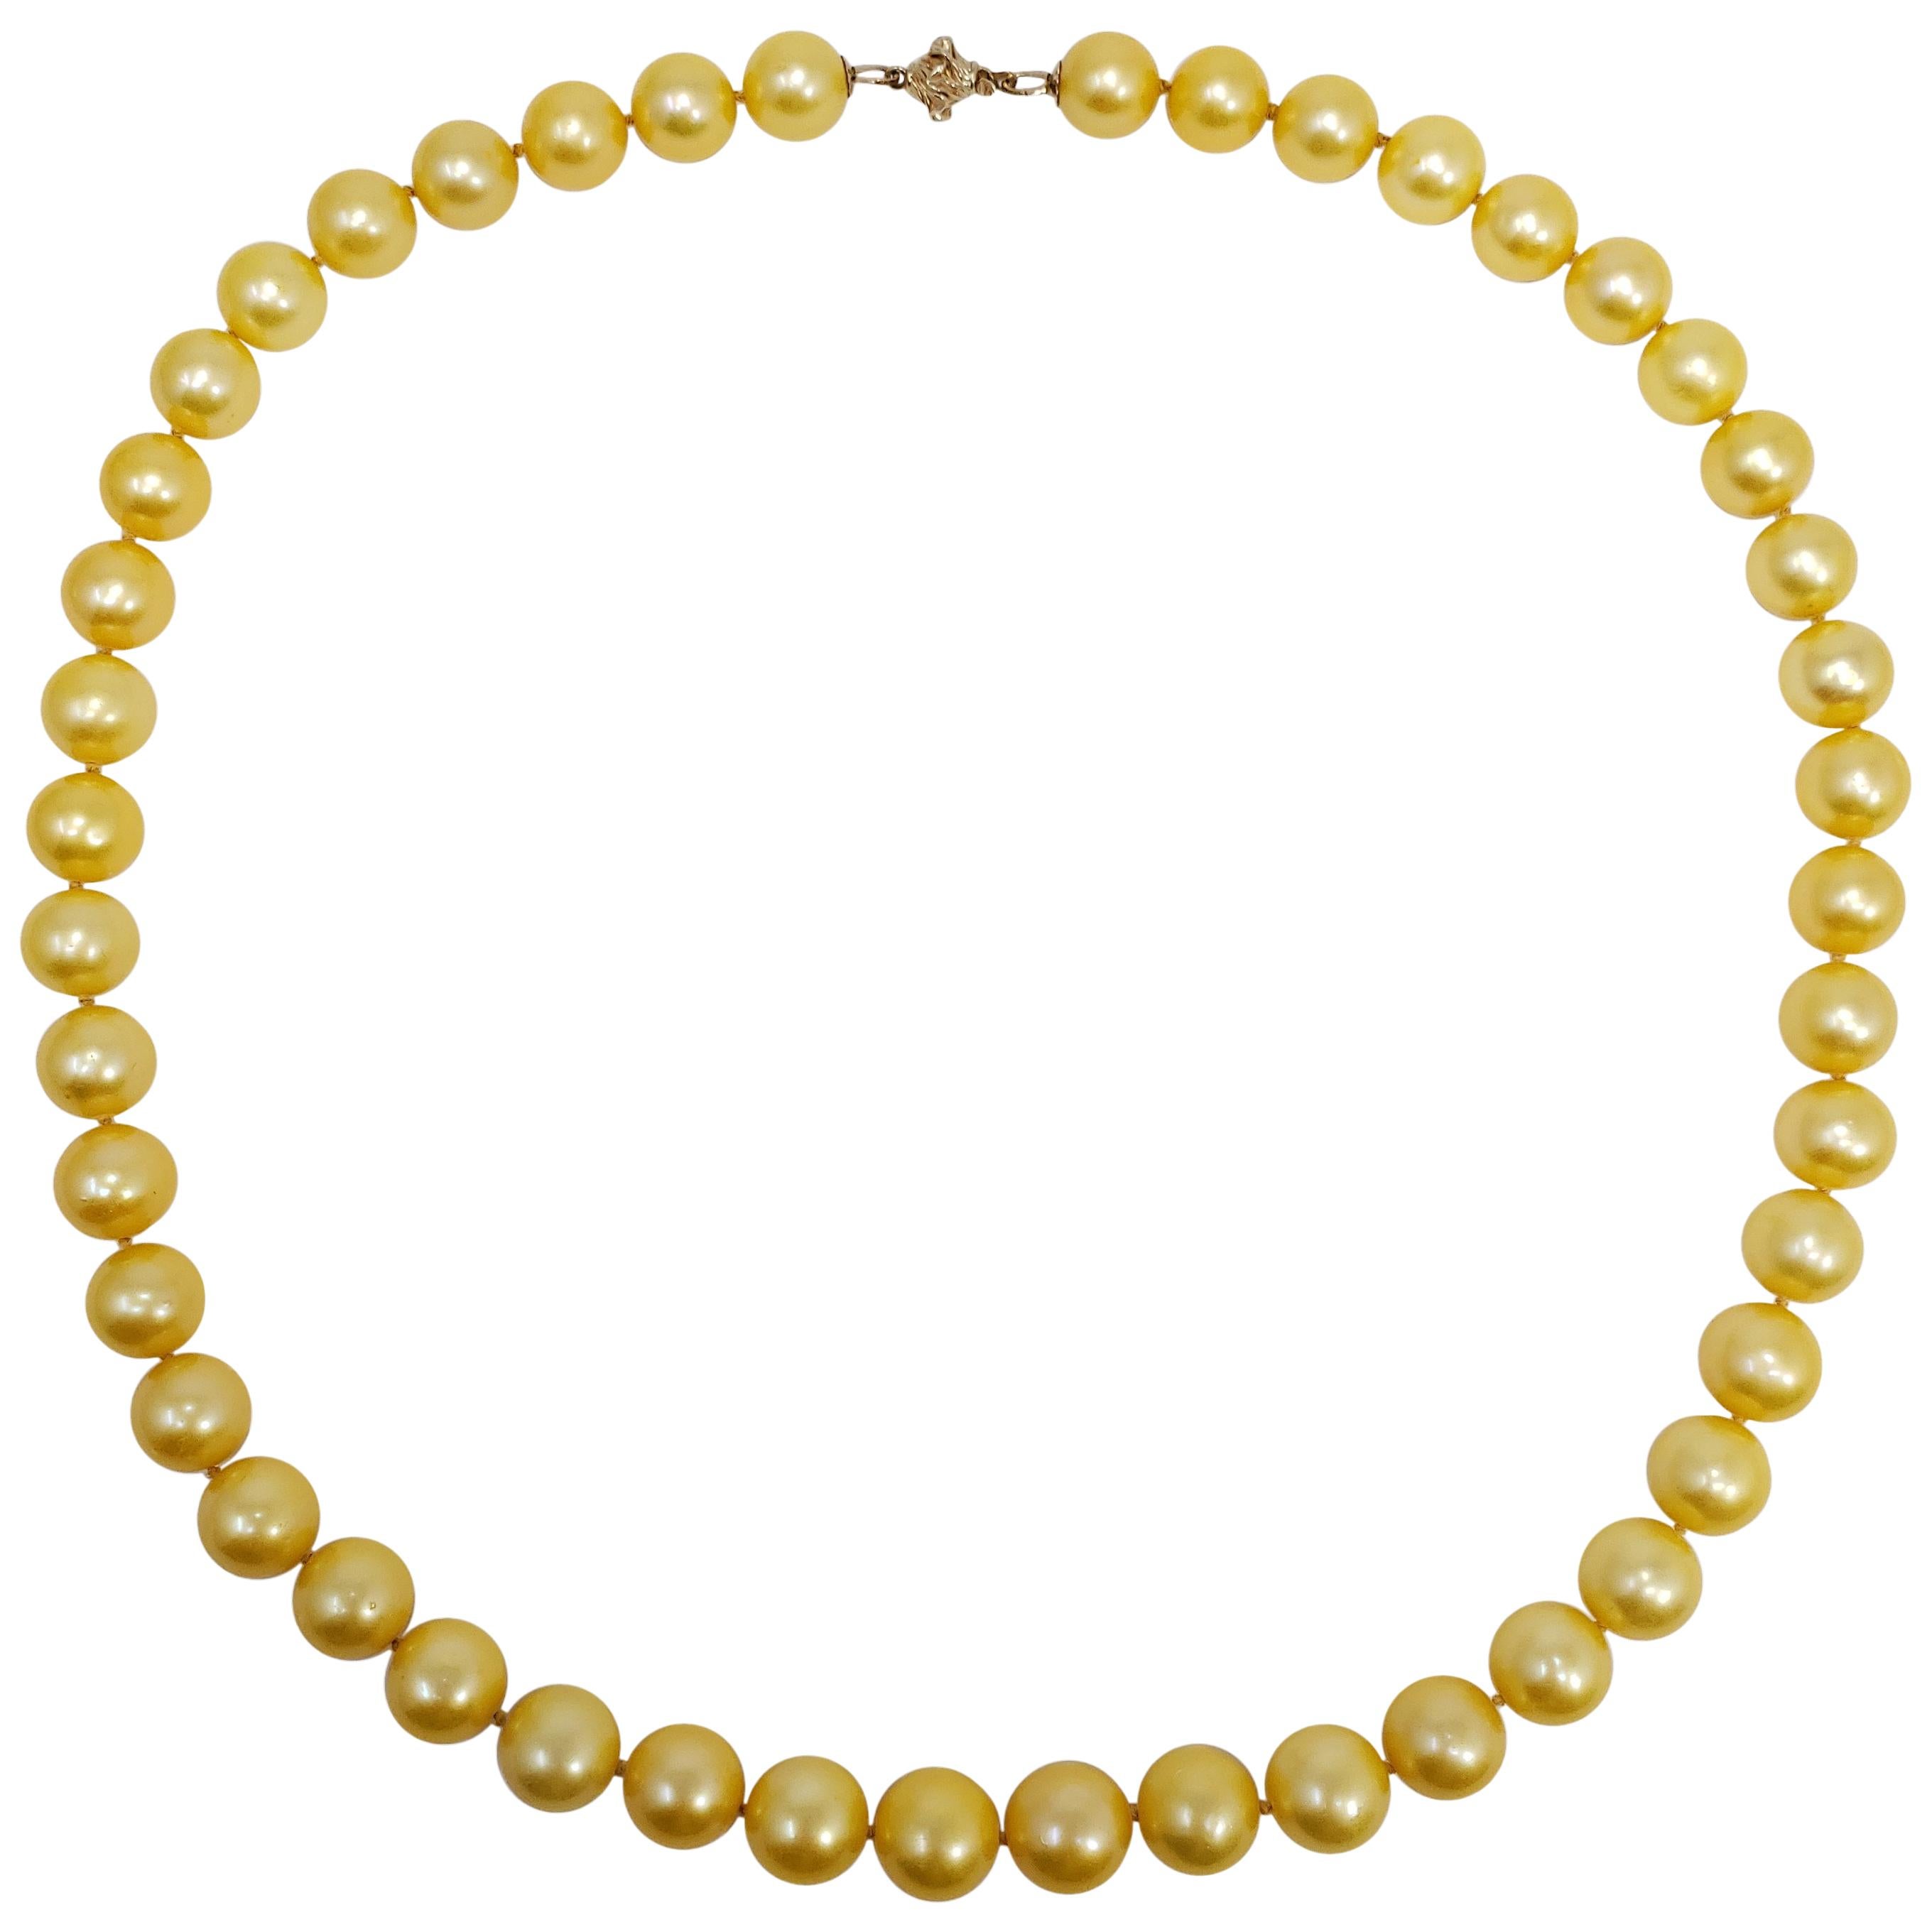 Genuine South Sea Pearl Bead Knotted String Necklace with 14 Karat Yellow Gold For Sale